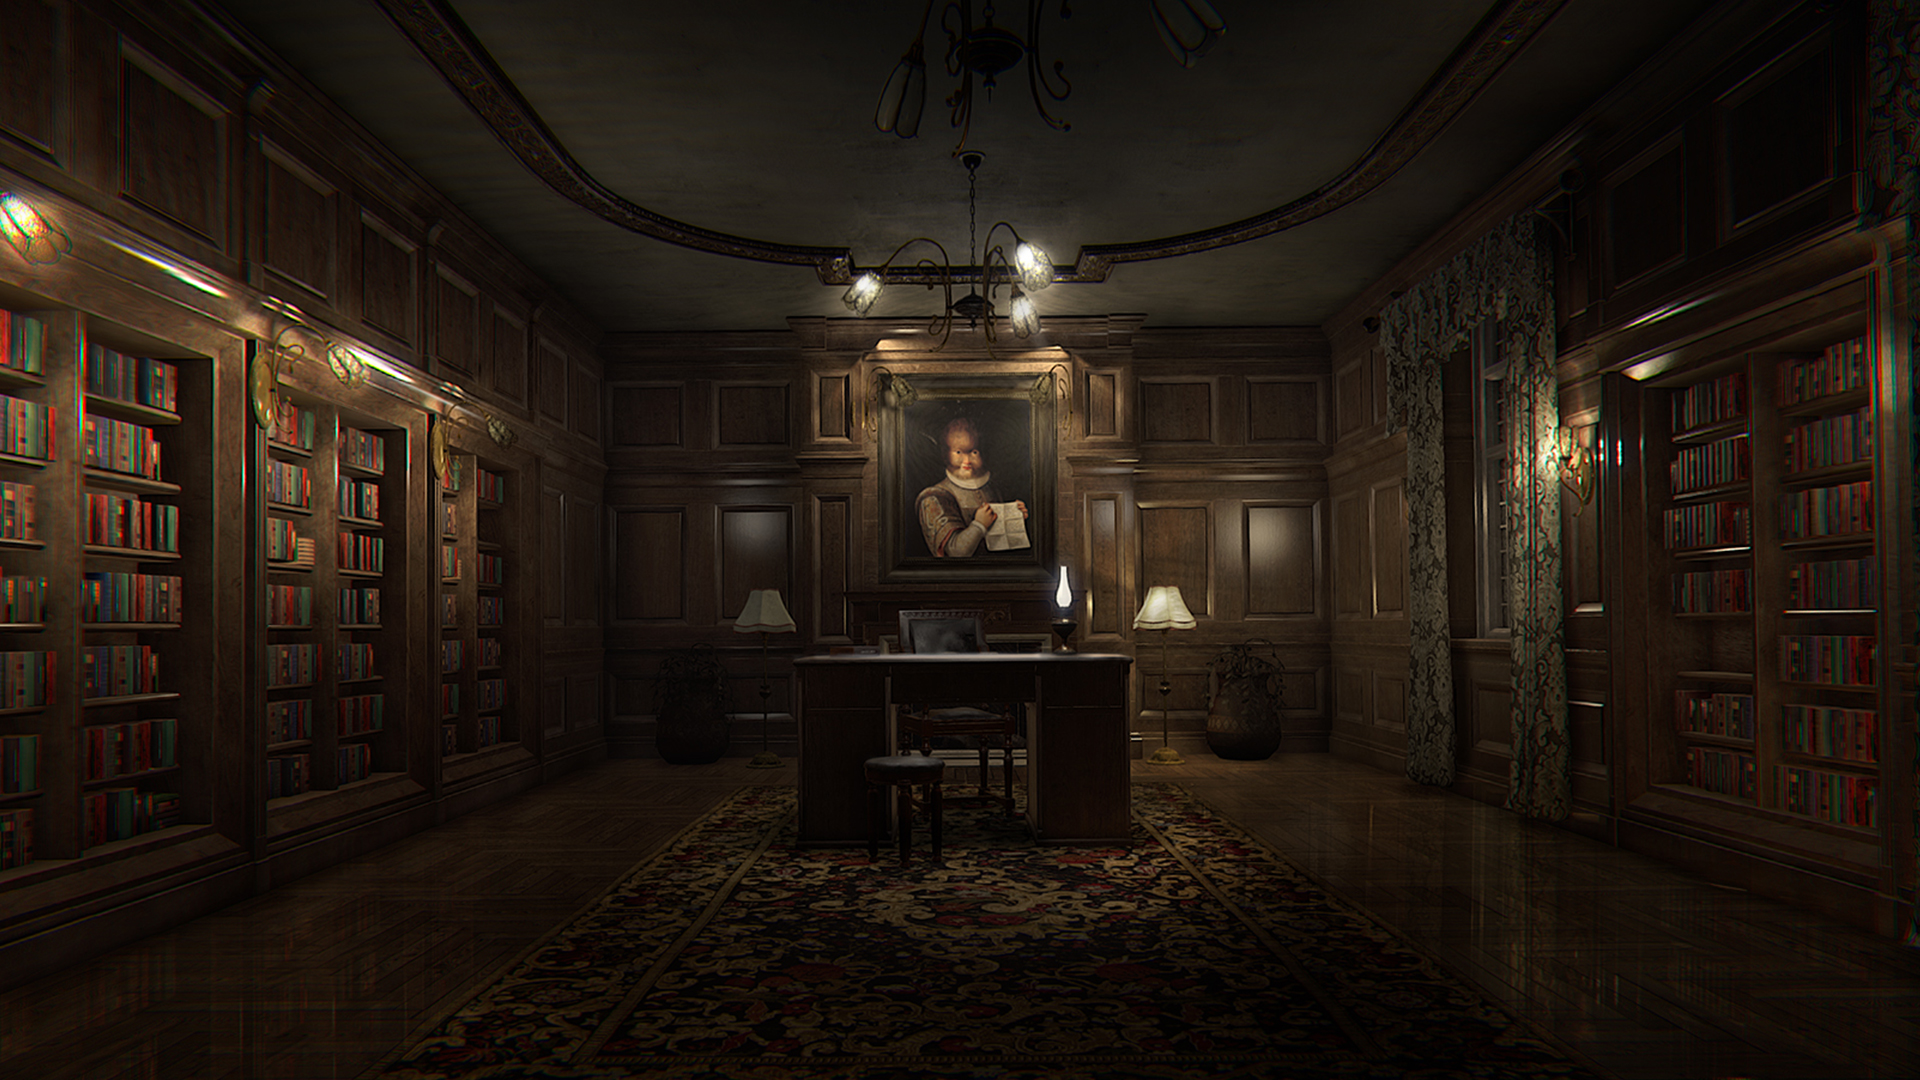 Layers of Fear System Requirements - Can I Run It? - PCGameBenchmark